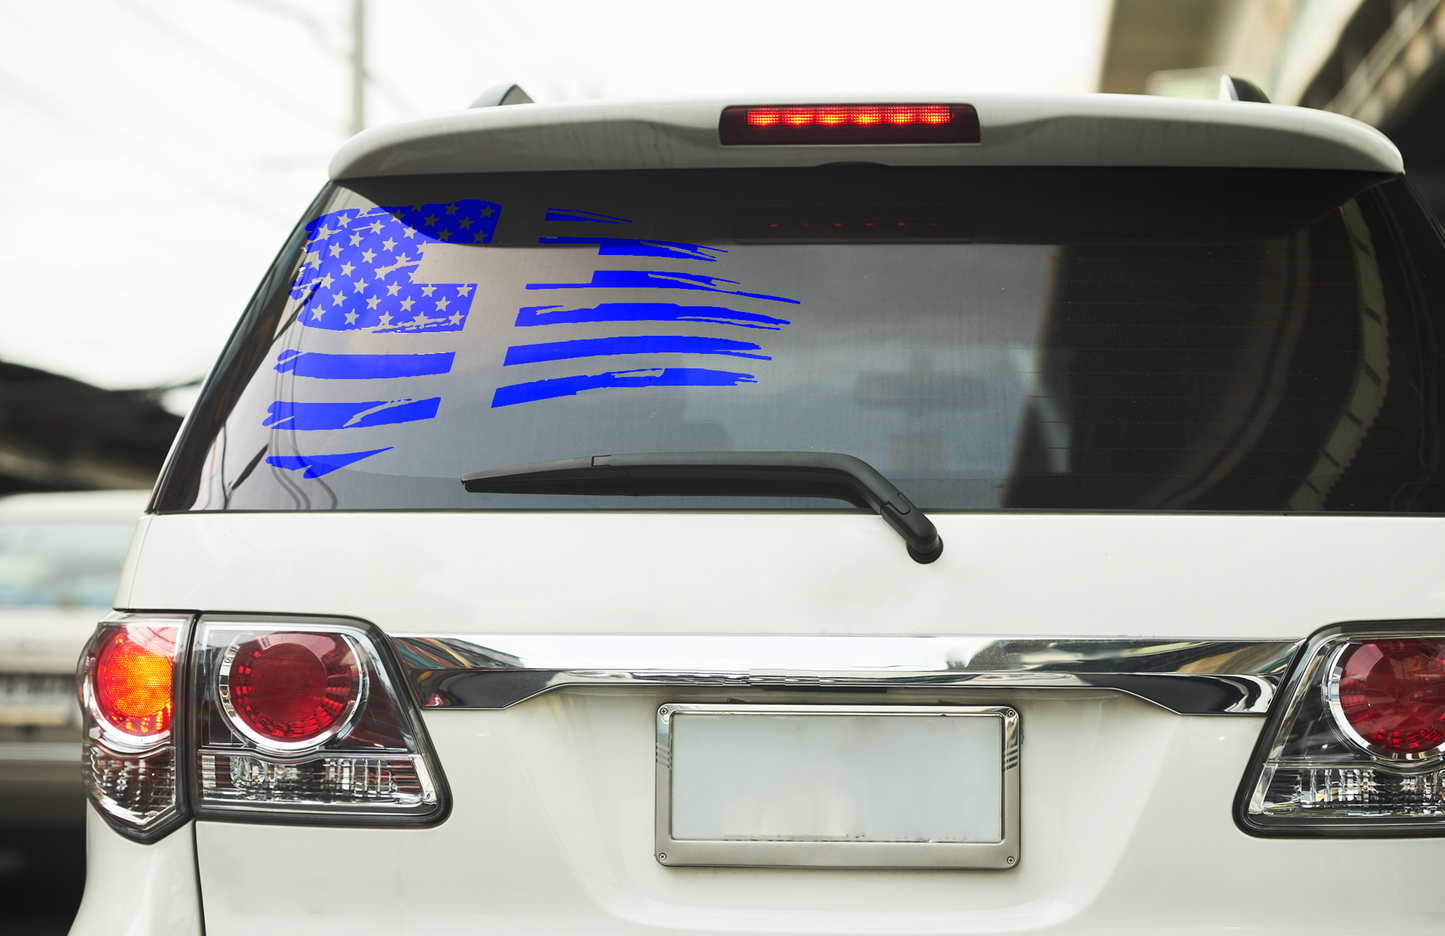 US Flag with cross- Vinyl Sticker - decal